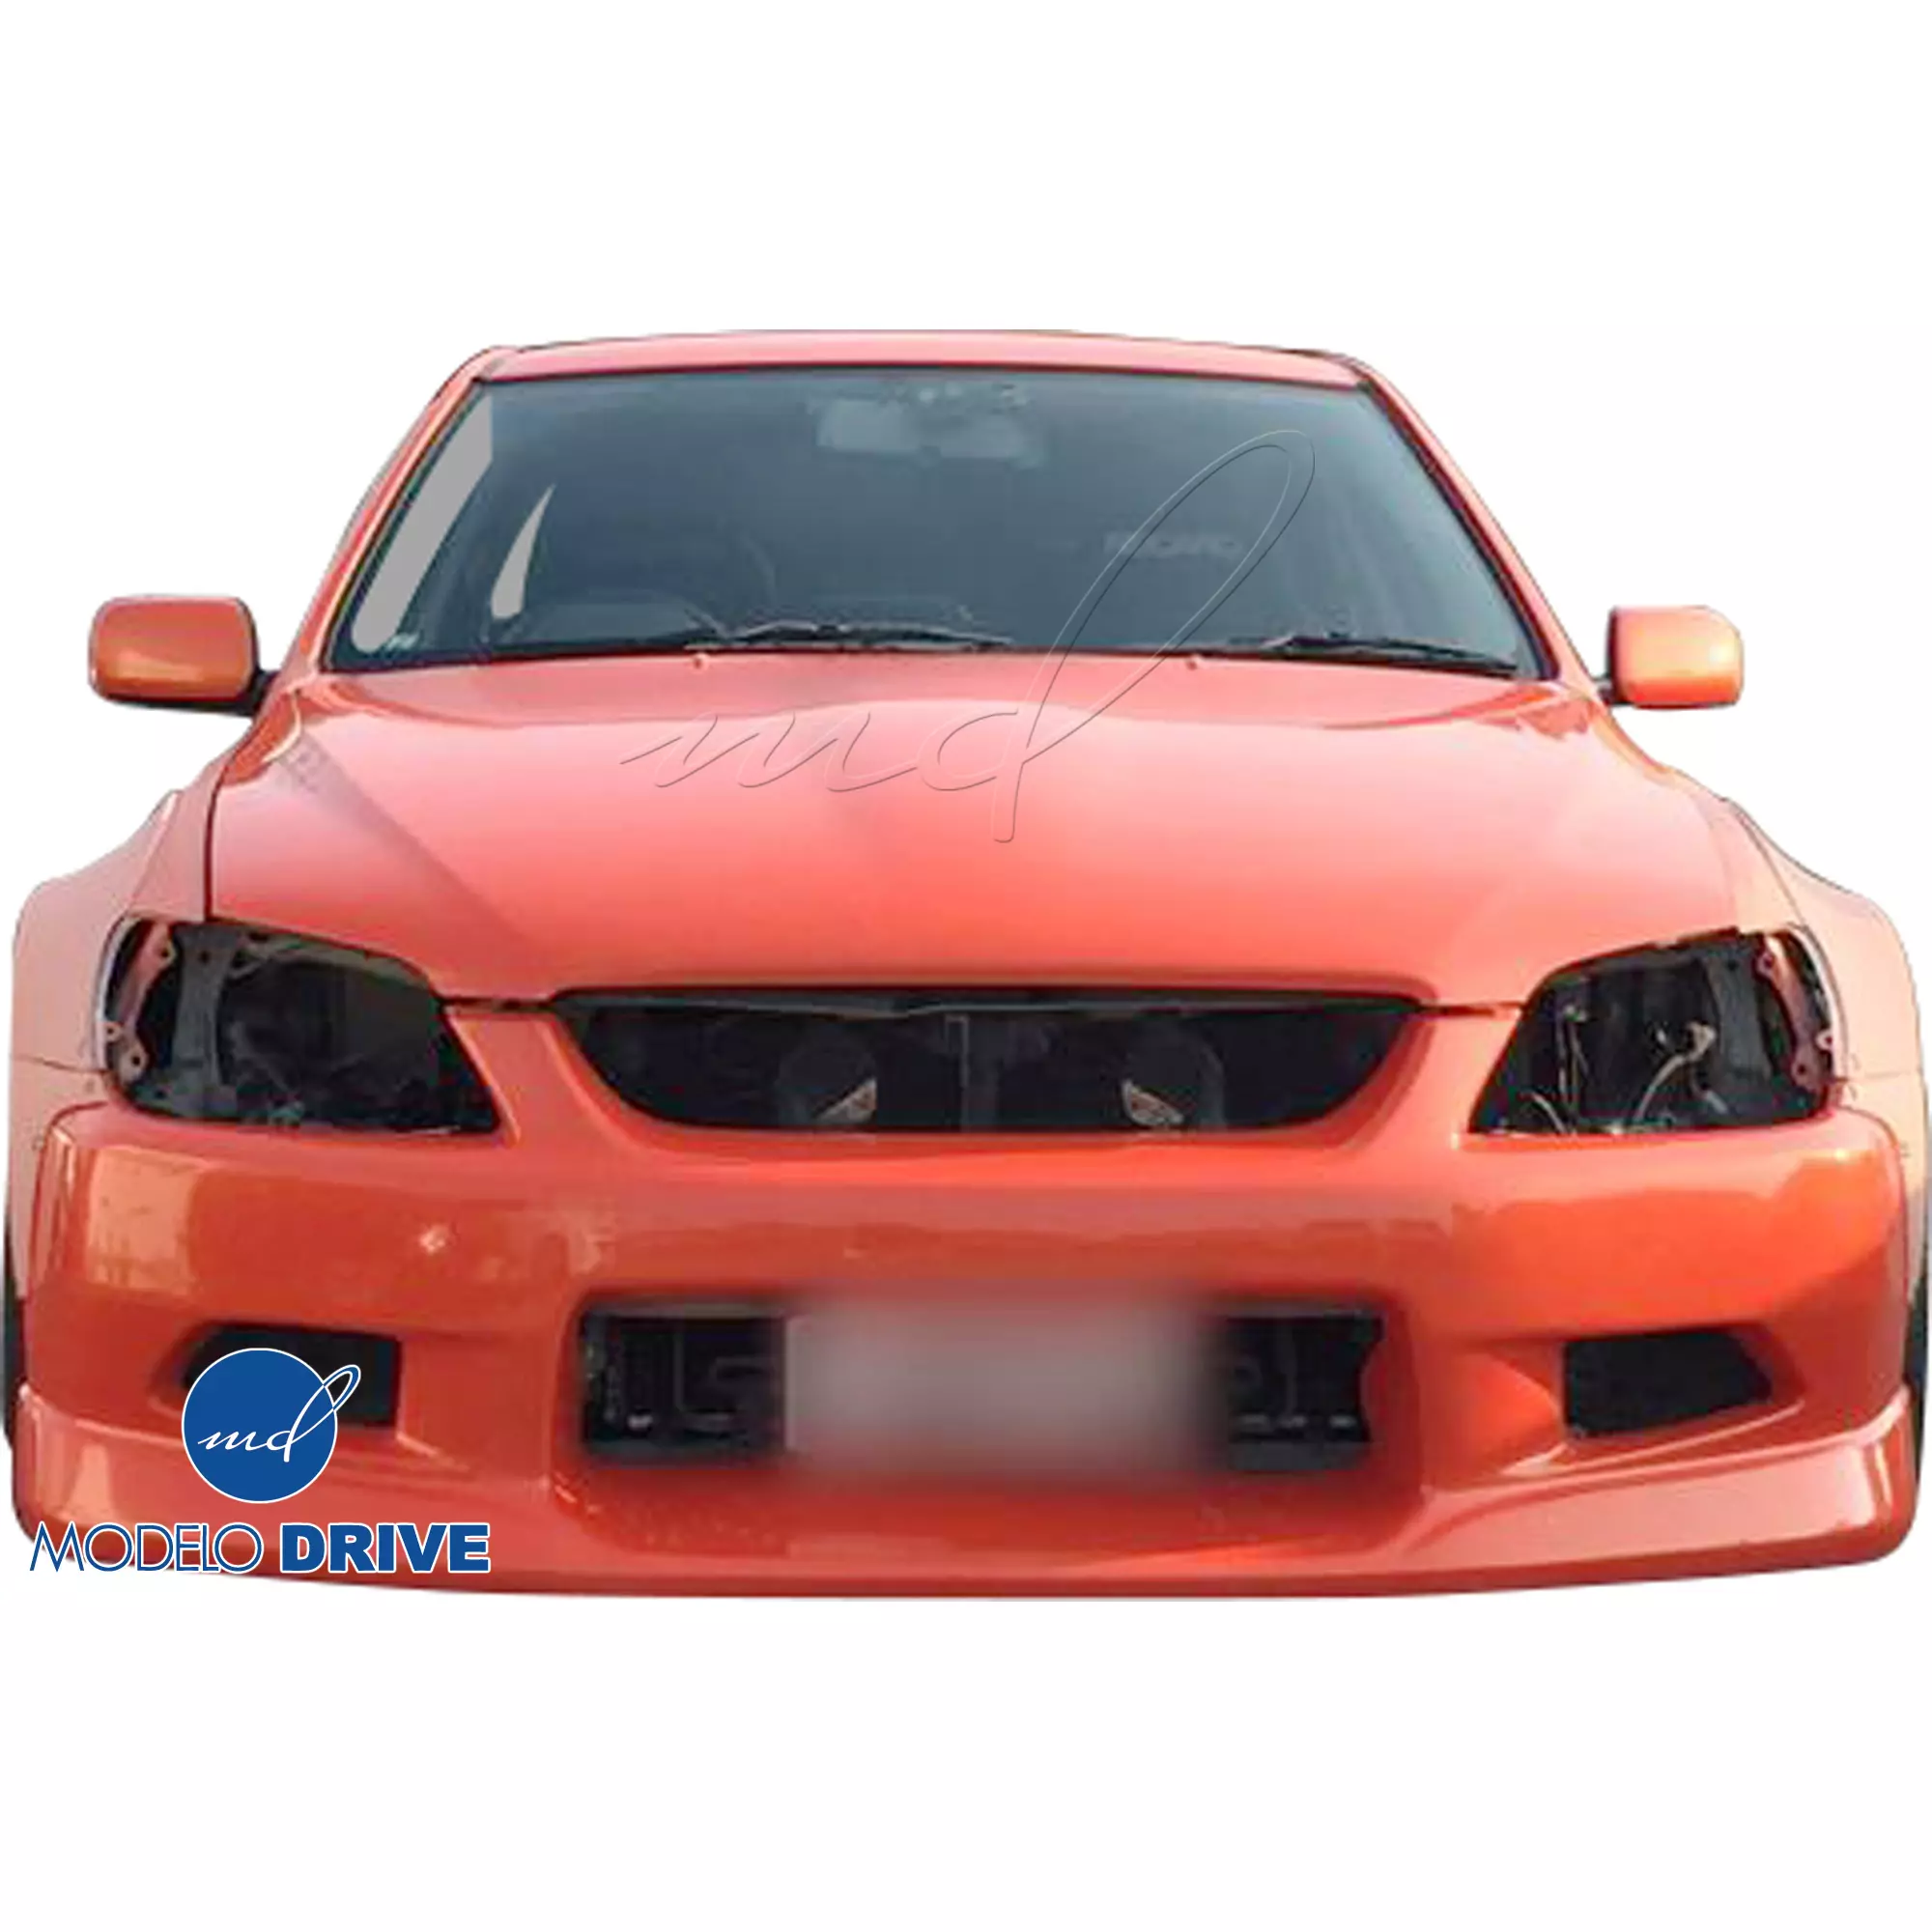 ModeloDrive FRP MSV Wide Body 40mm Fender Flares (front) 4pc > Lexus IS Series IS300 2000-2005> 4dr - Image 31